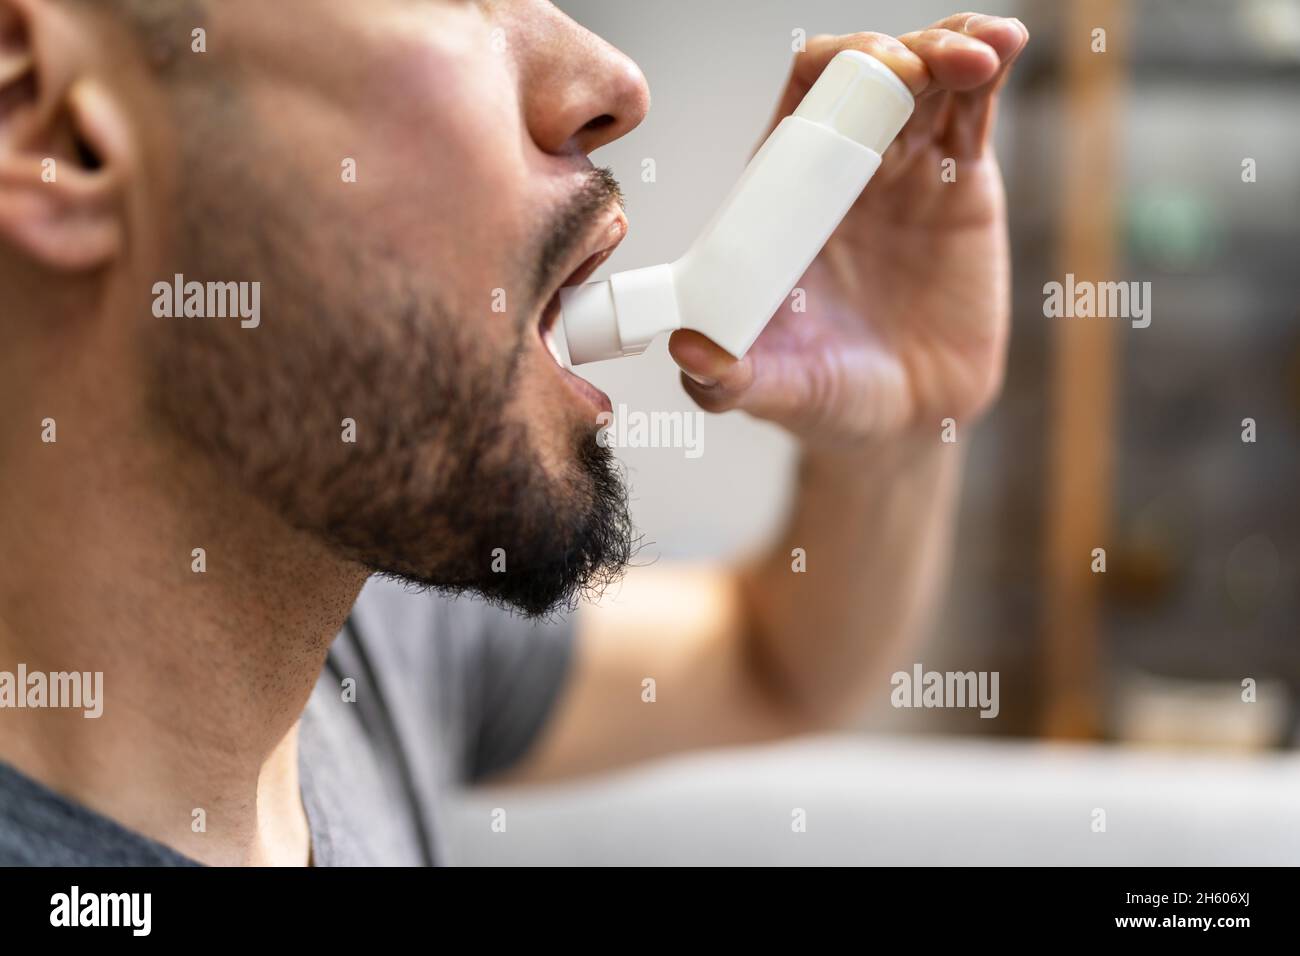 Man With Asthma Using An Asthma Inhaler For Preventing Attacks Stock Photo